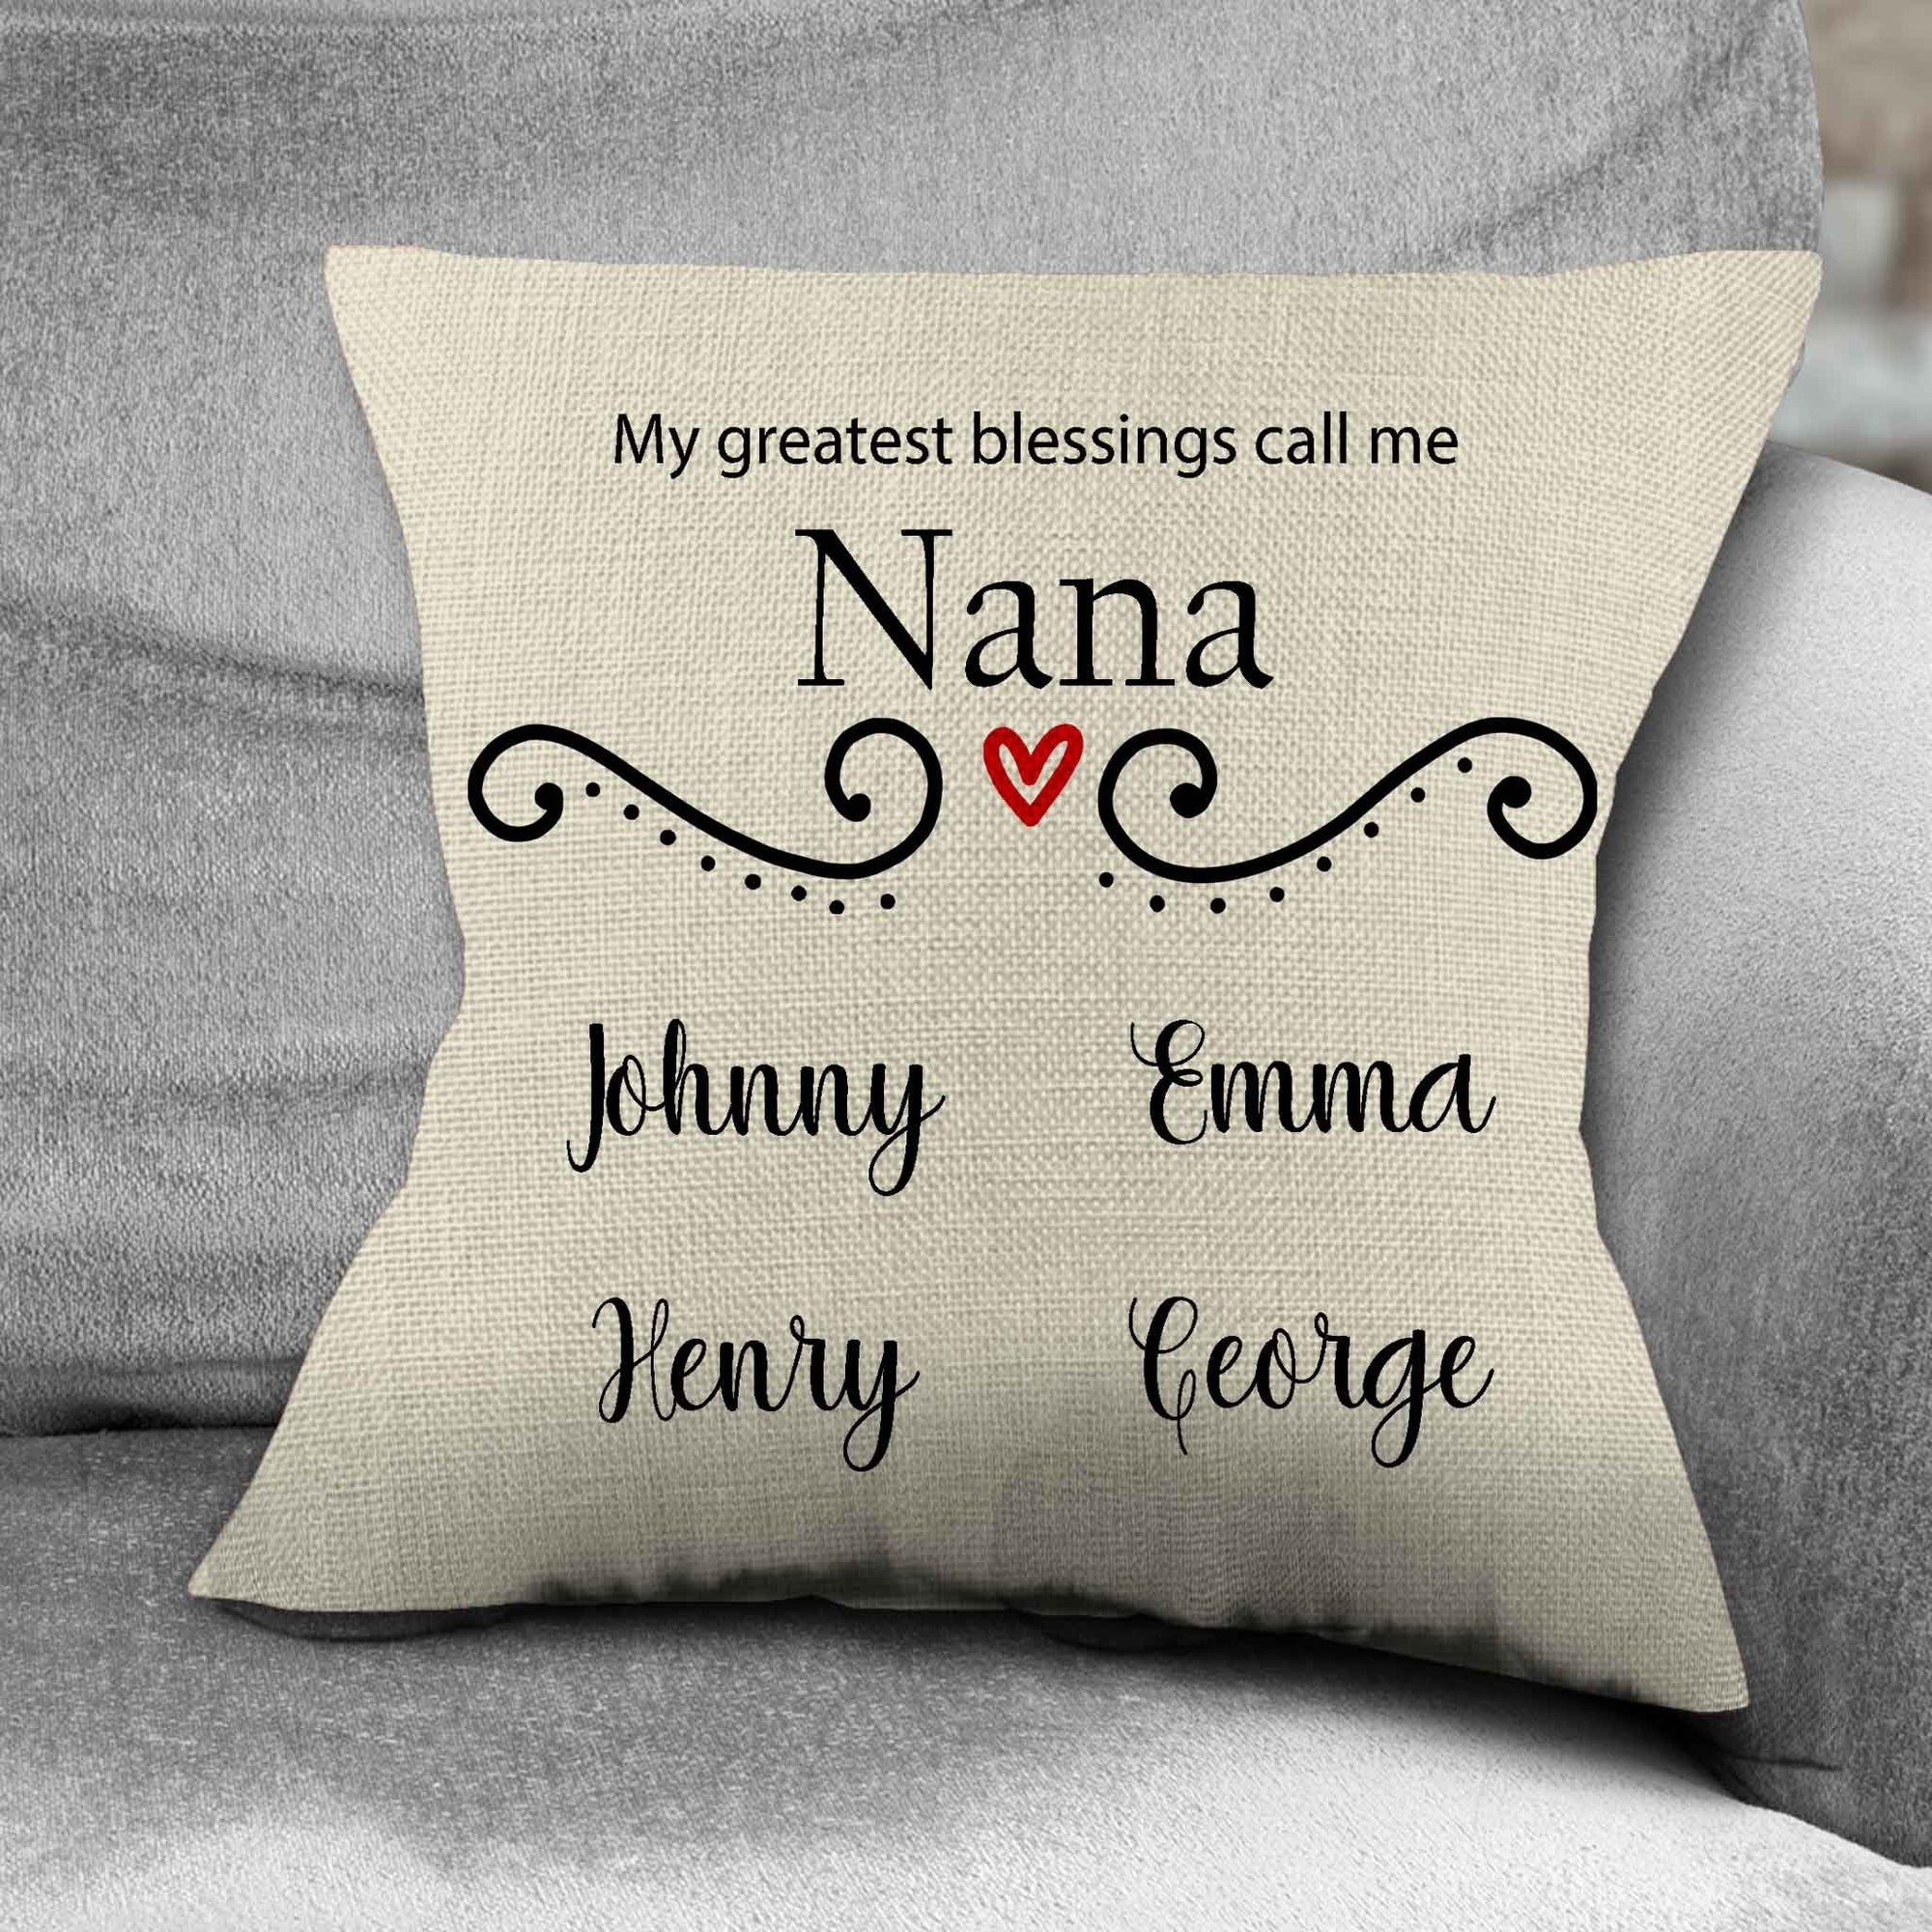 Personalized Throw Pillow | Custom Decorative Pillow | Nana's Greatest Blessing